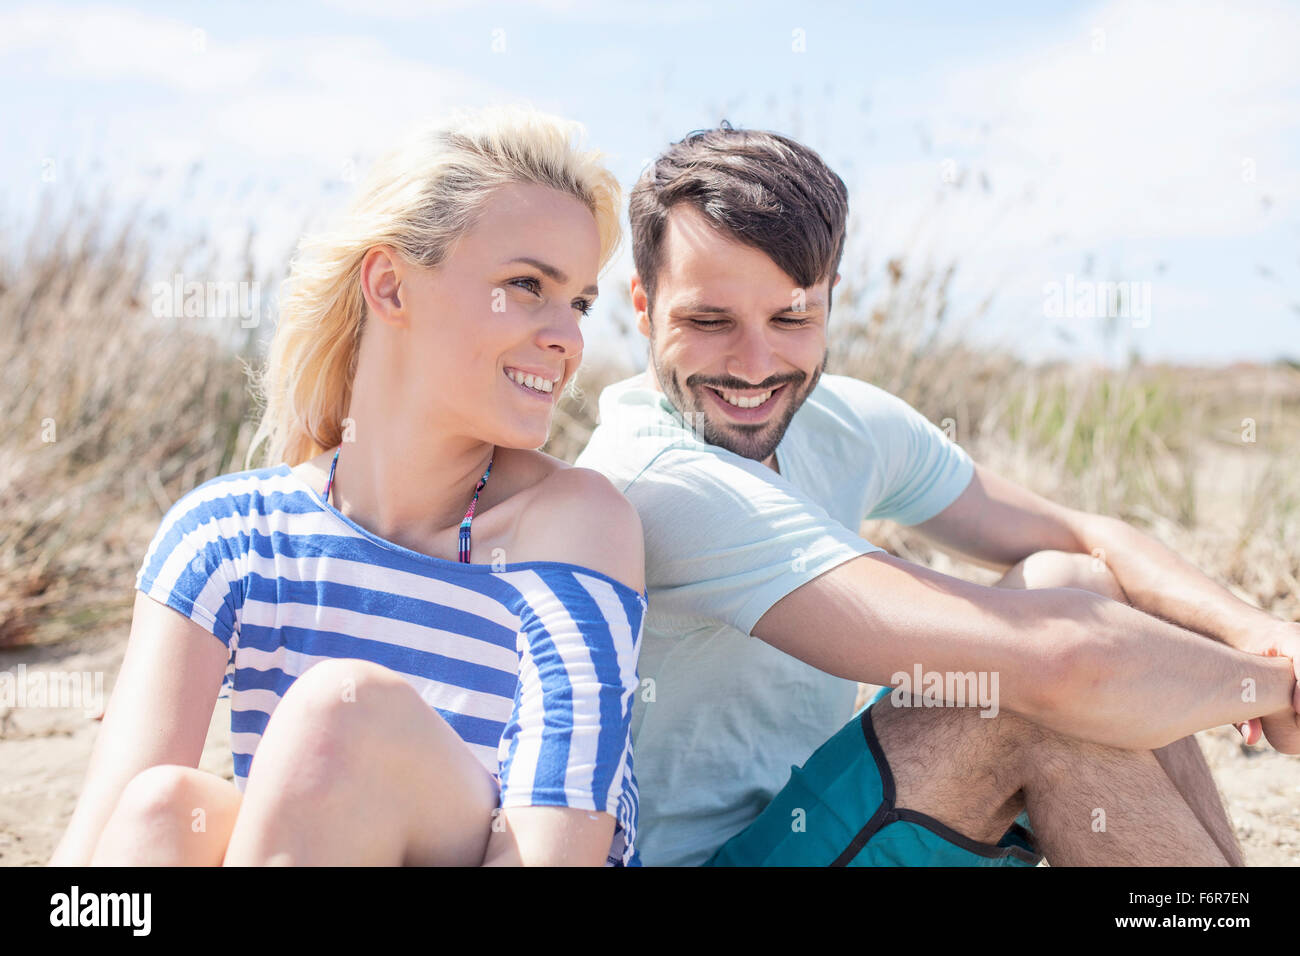 Young couple sitting side by side on beach Stock Photo